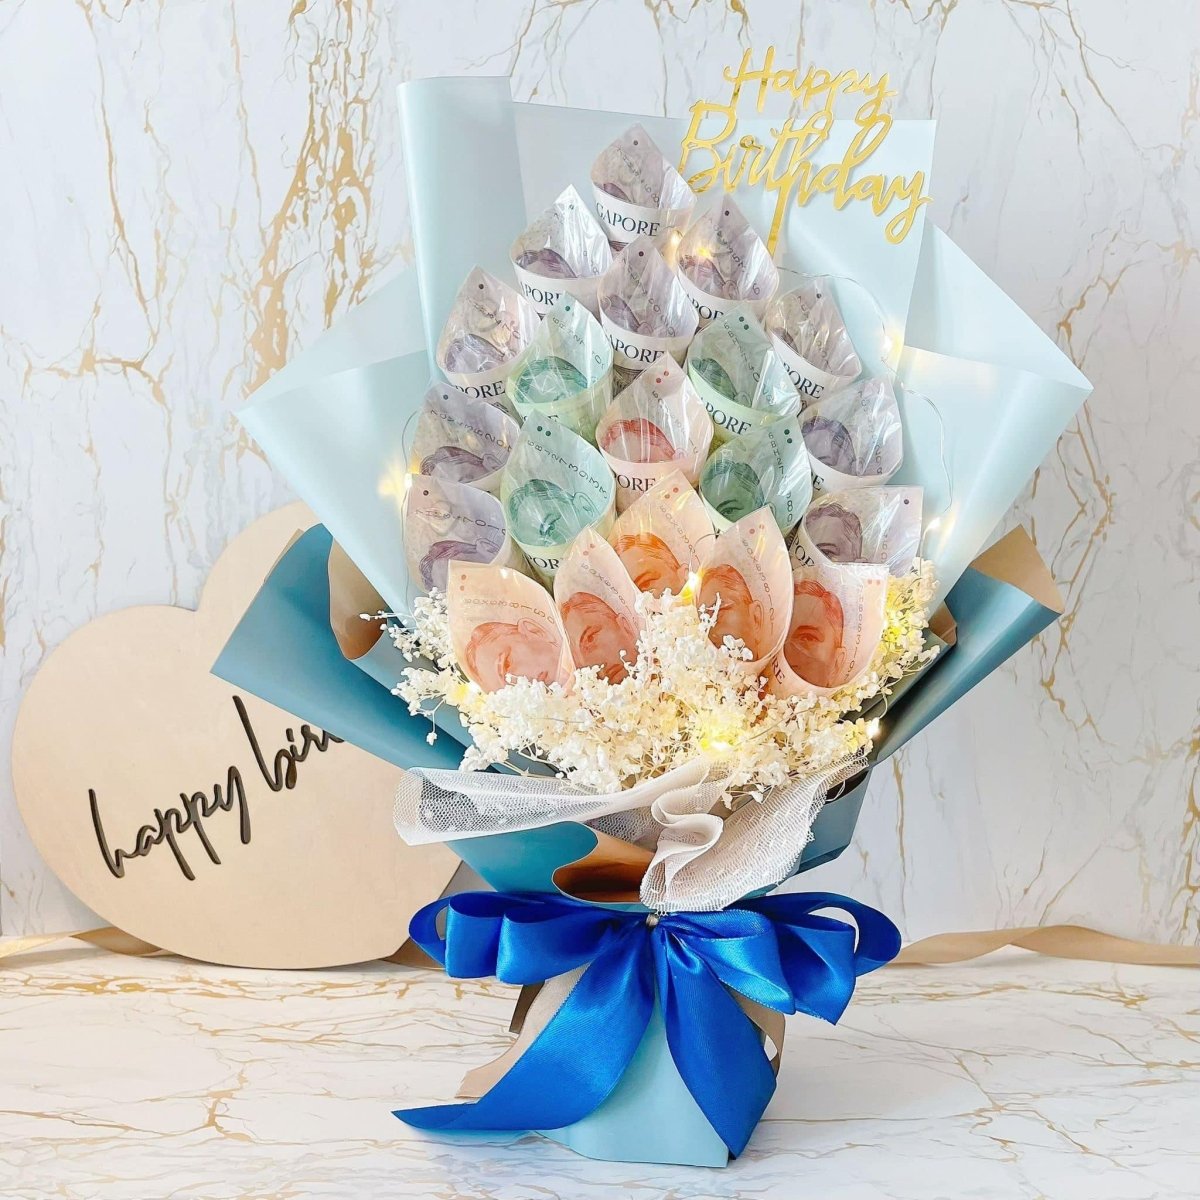 $100 Dollar Thoughts for HIM - Luxury Cash Money Bouquet(1 Day Pre-order, Cash Notes Included) - Rainbowly Fresh Fruit Gift and Flower Arrangments